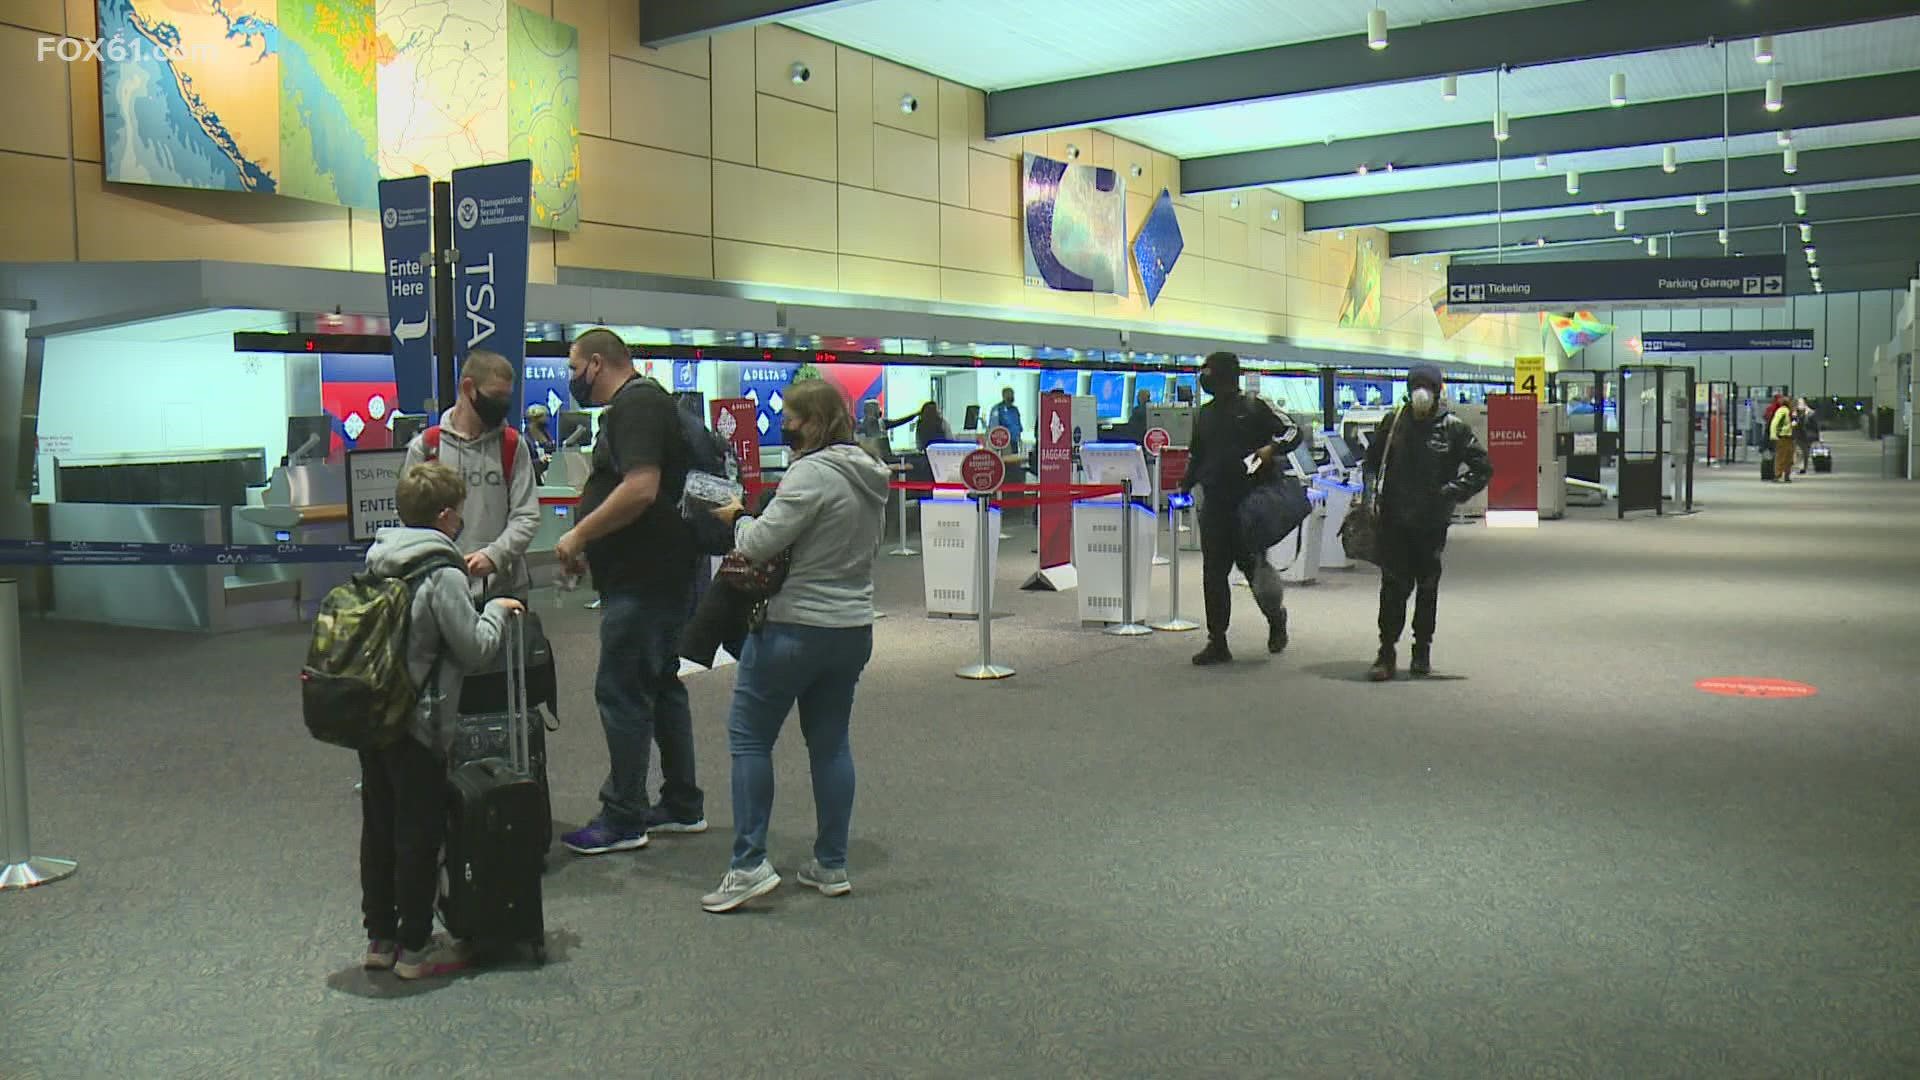 For many passengers at Bradley International Airport, it's their first trip since the start of the pandemic.